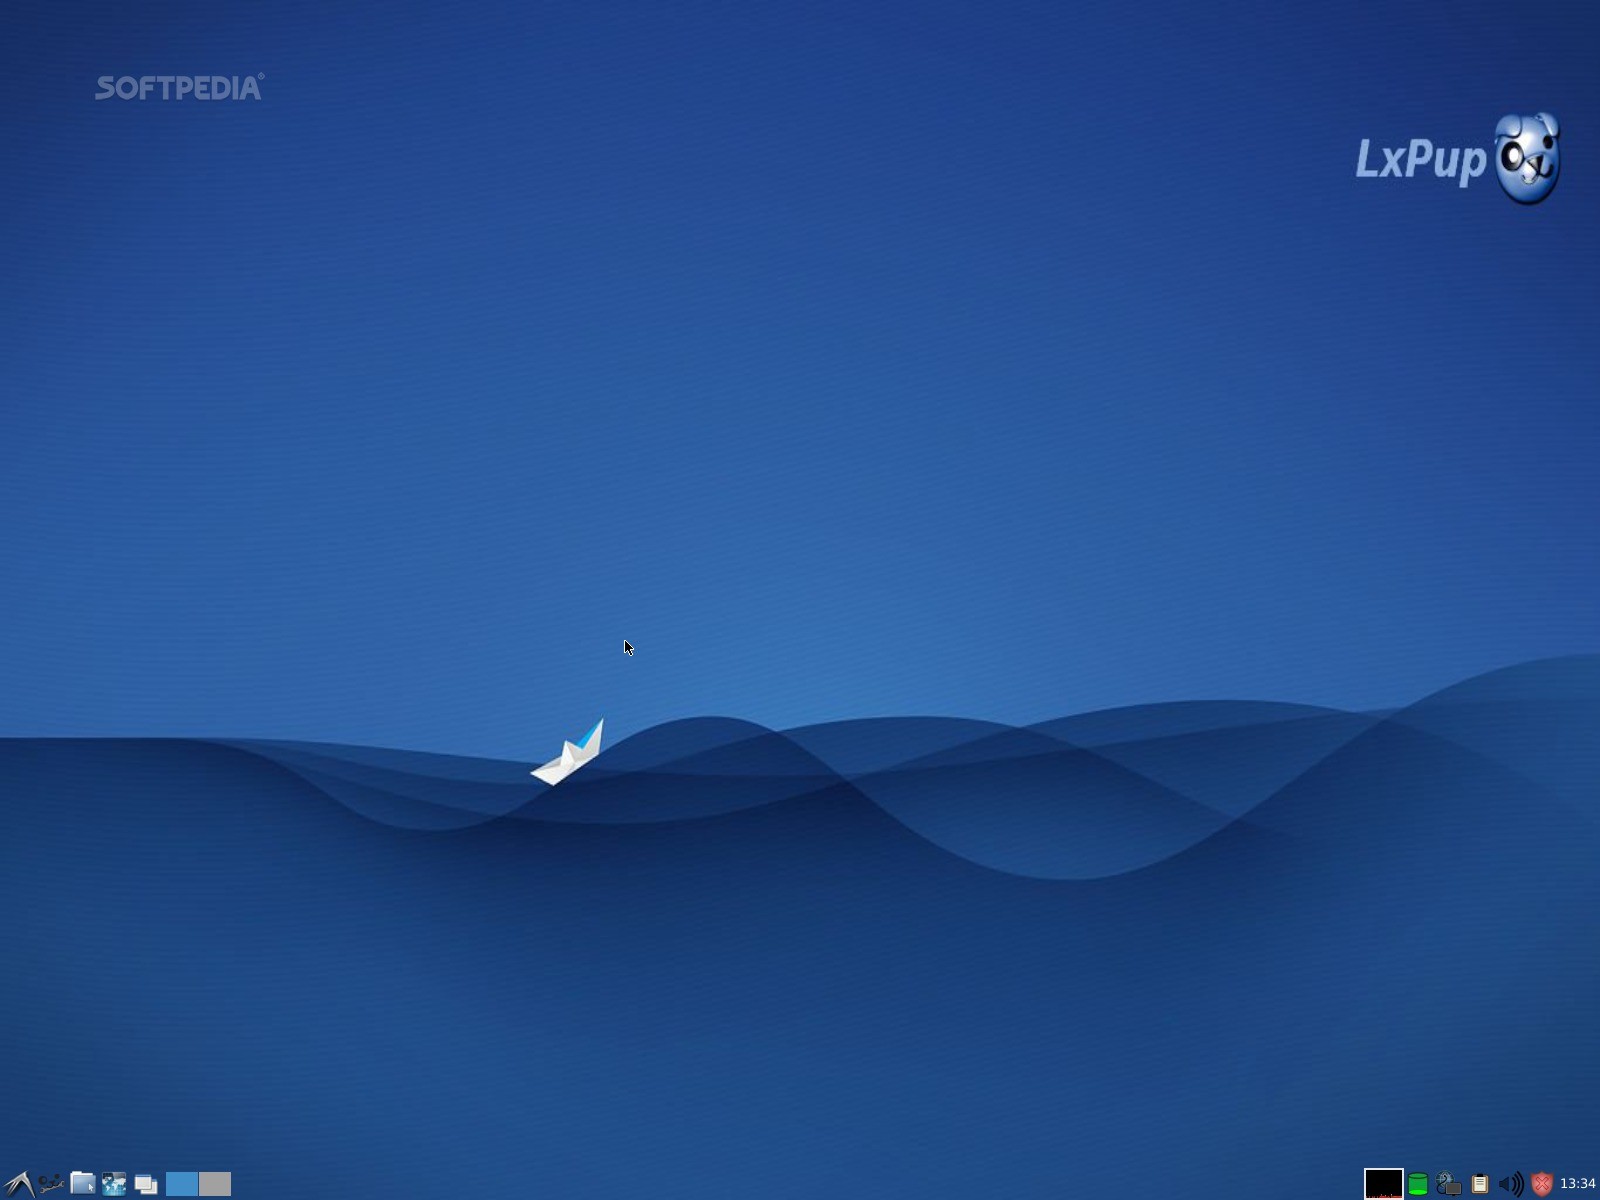 Lxpup 14 10 Is A Ridiculously Small Distro Based On Puppy Linux And Lxde Gallery